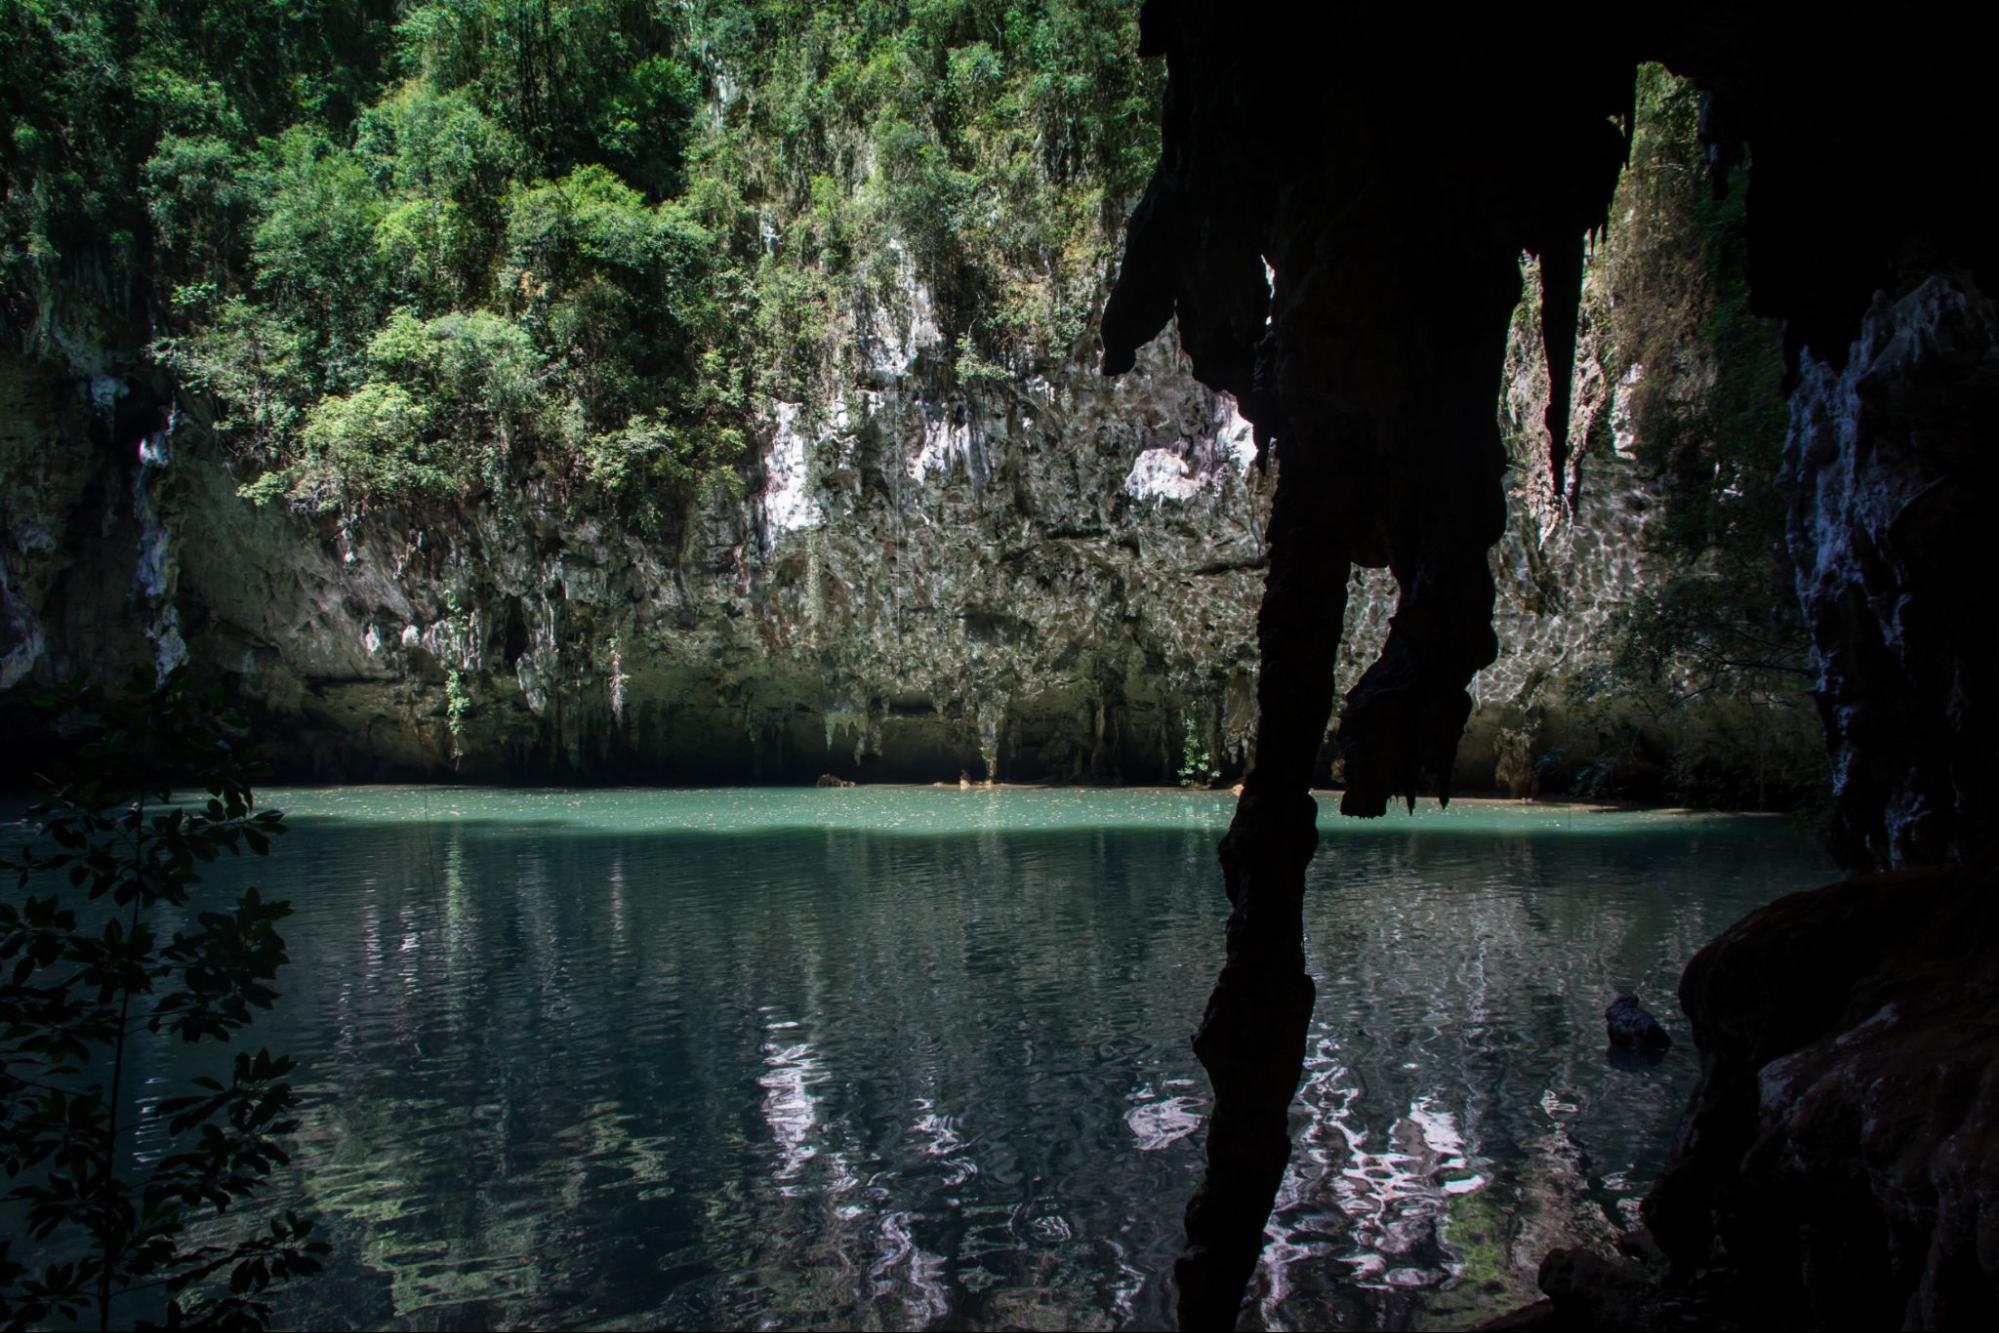 Hinagdanan cave in Panglao, Bohol, in the Philippines